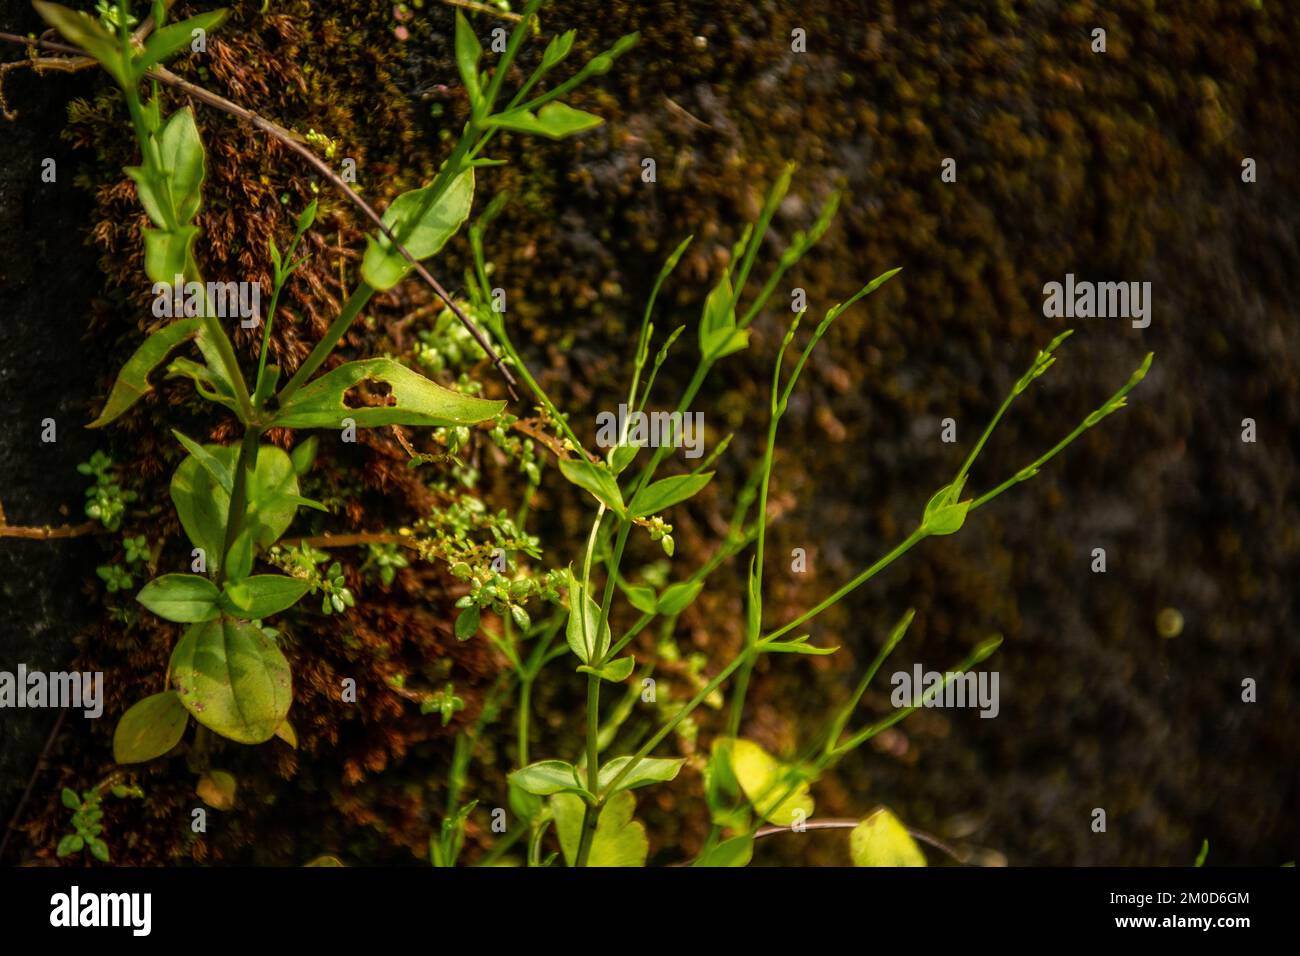 A close up shot of three-nerved sandwort plants growing out of the soil Stock Photo